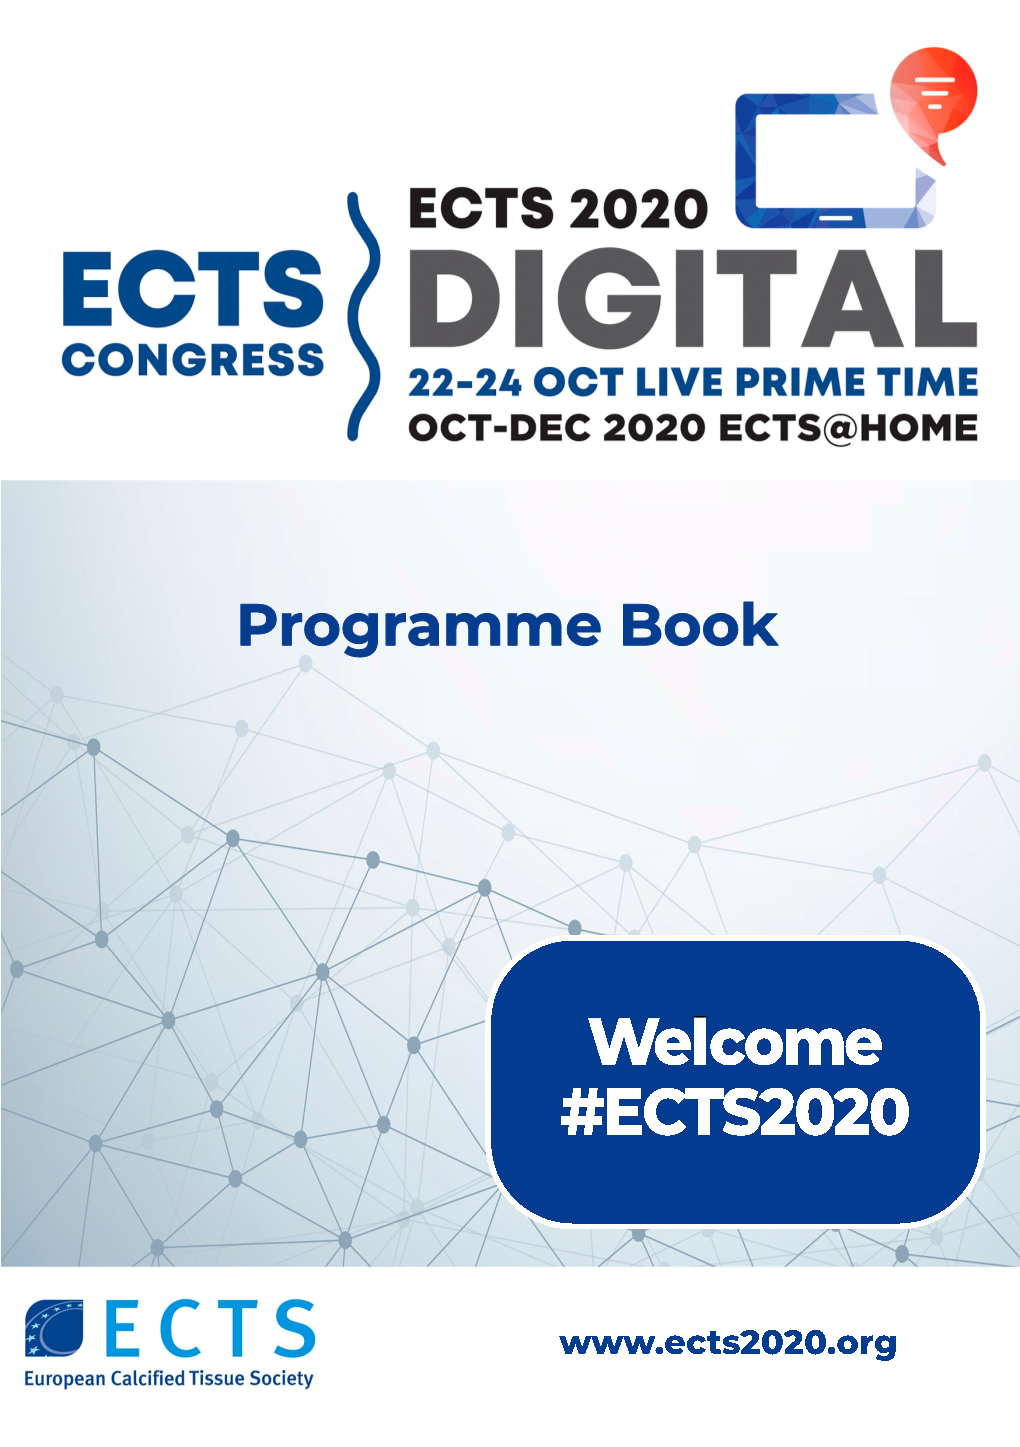 Download ECTS 2020 – Final Programme Book